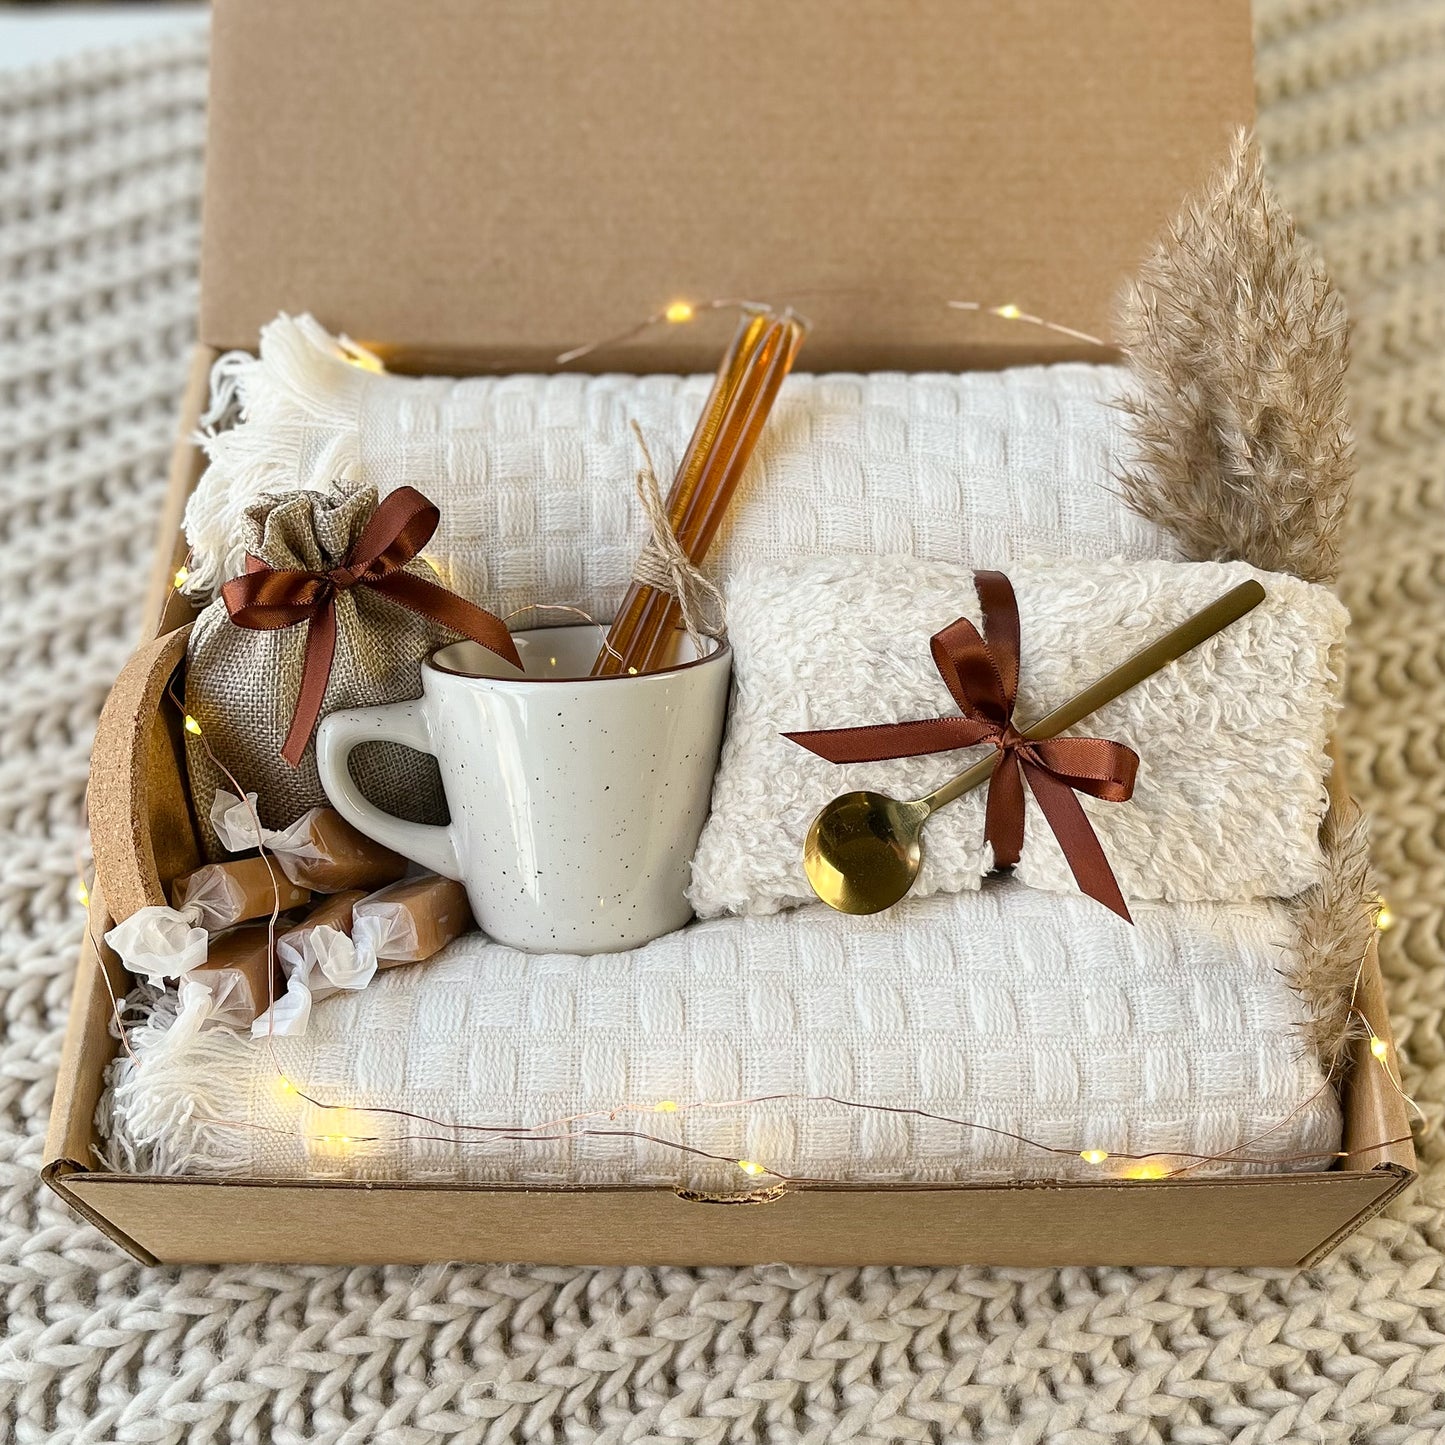 Gift box with blanket